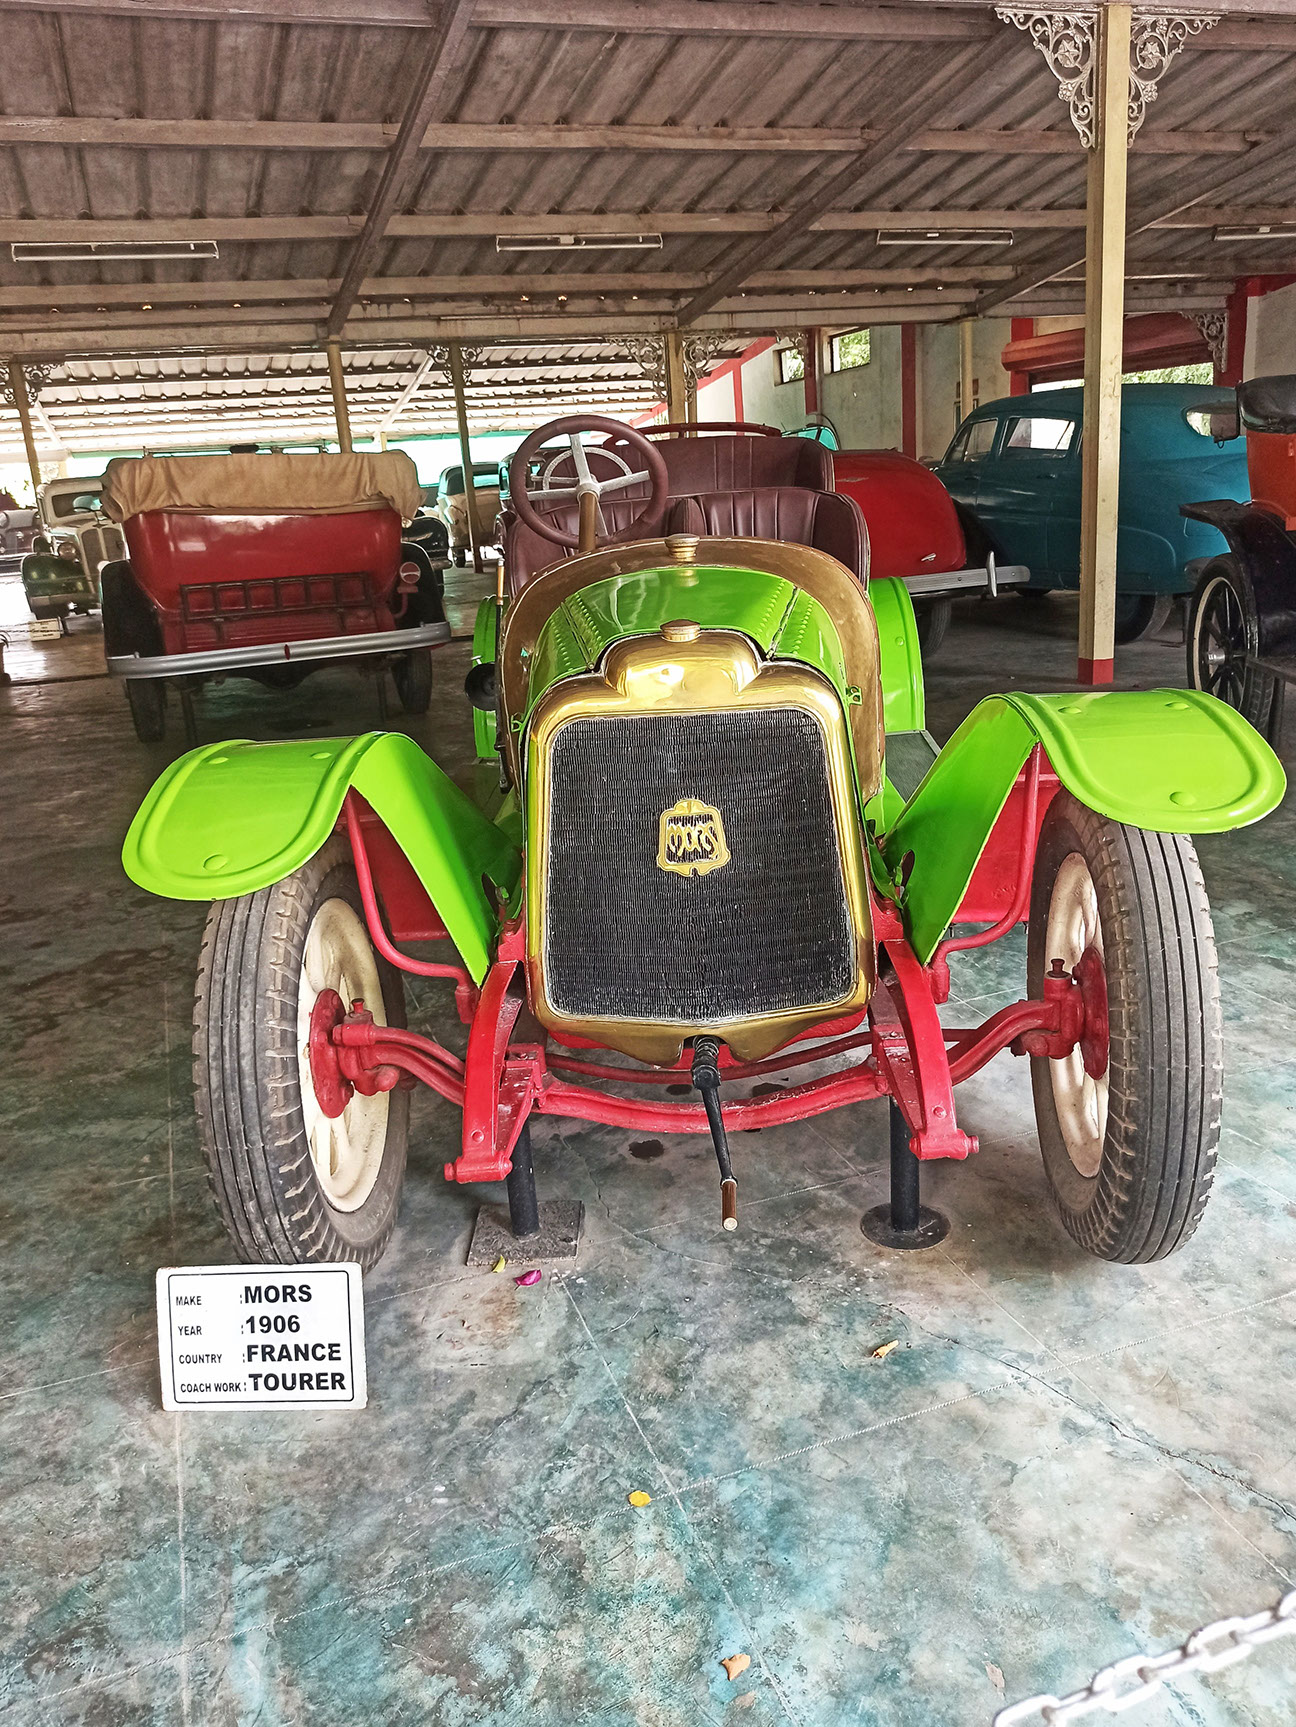 Early models of French cars at auto world vintage car museum in Ahmedabad